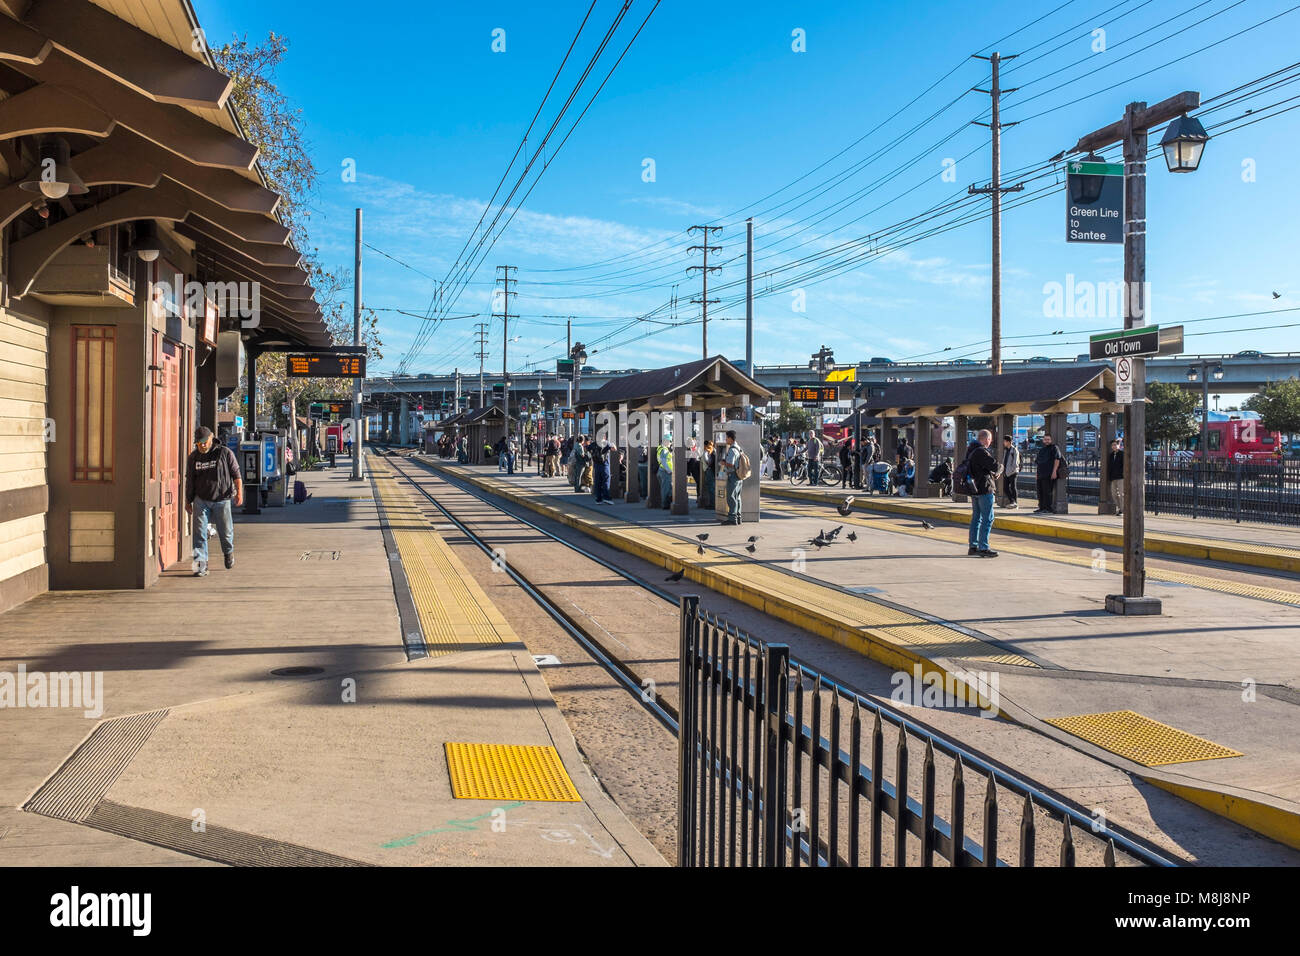 SAN DIEGO, CALIFORNIA, USA - Old Town Transit Centre rail station in the Old Town part of the city of San Diego. Stock Photo